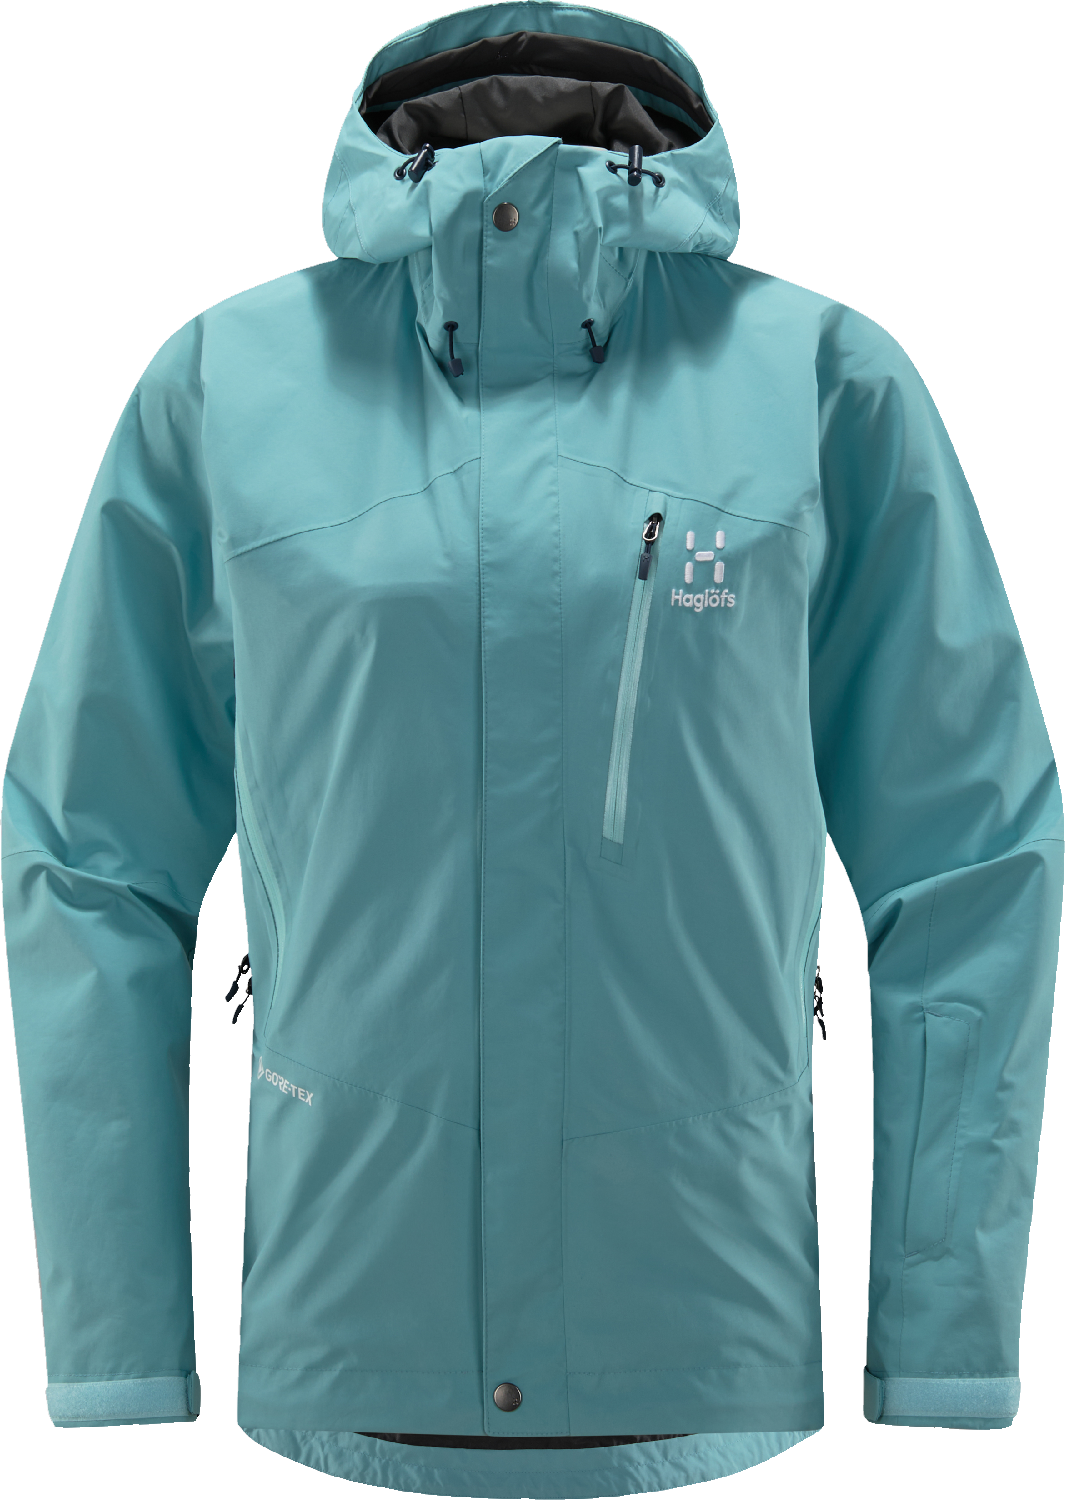 Women’s Astral GORE-TEX Jacket Frost Blue